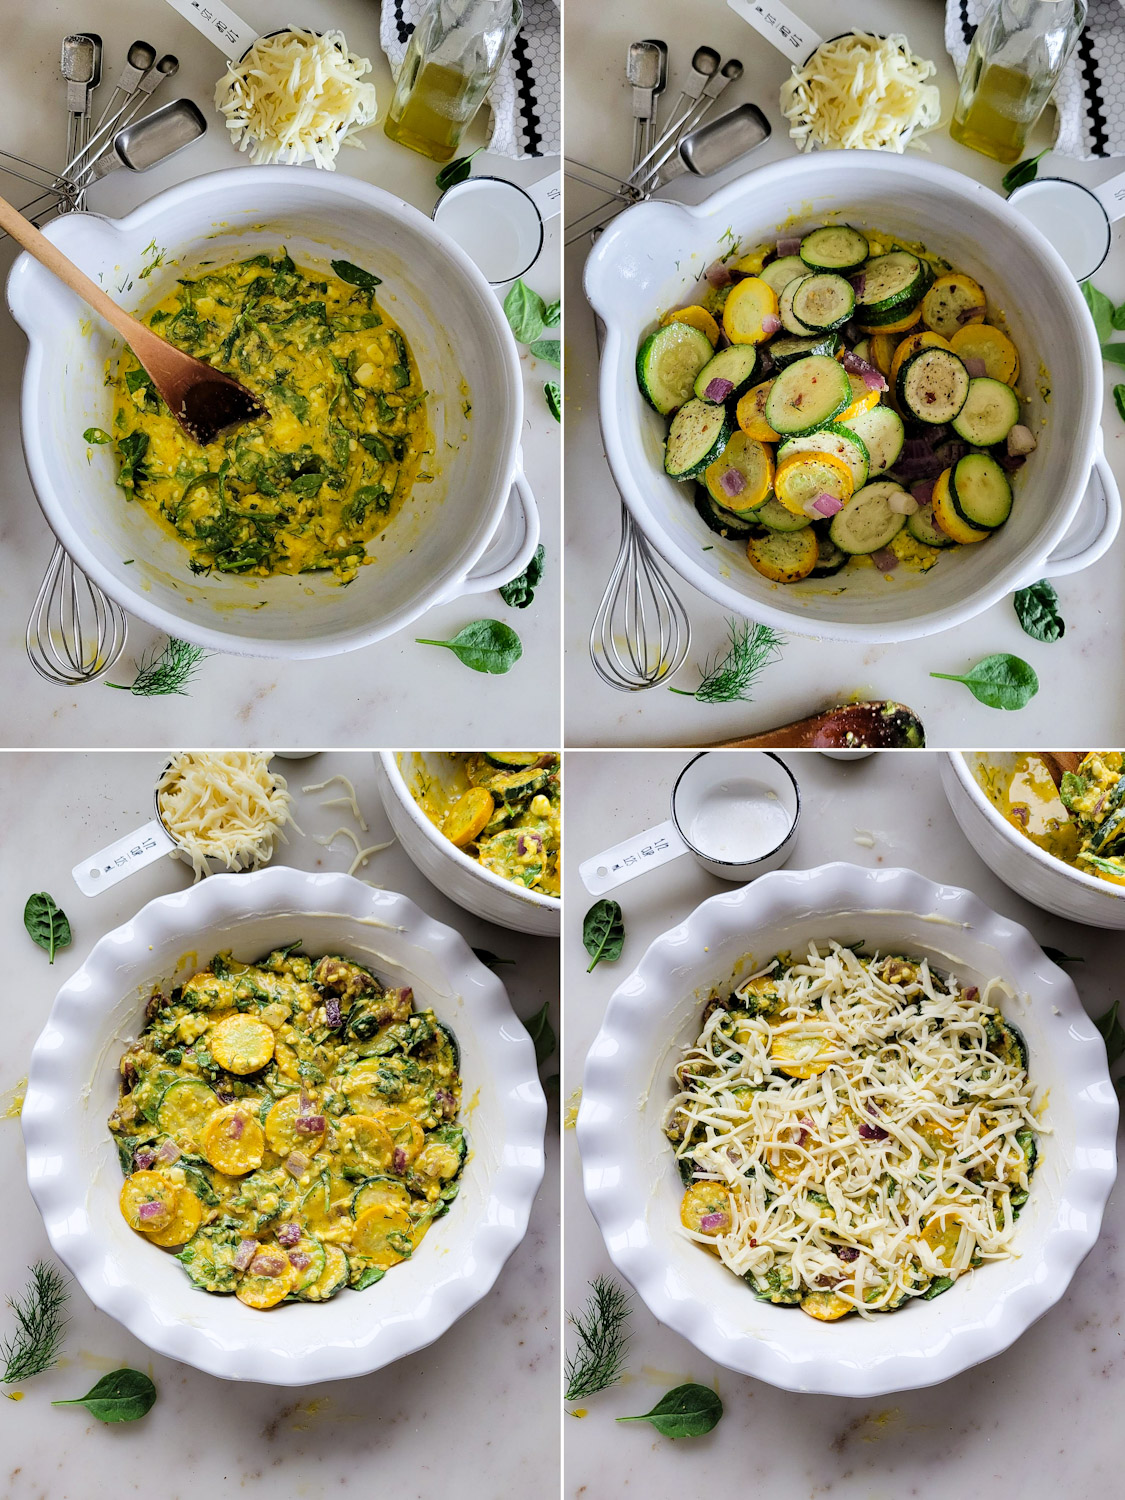 Collage showing the assembling of a Zucchini Spanakopita Quiche.